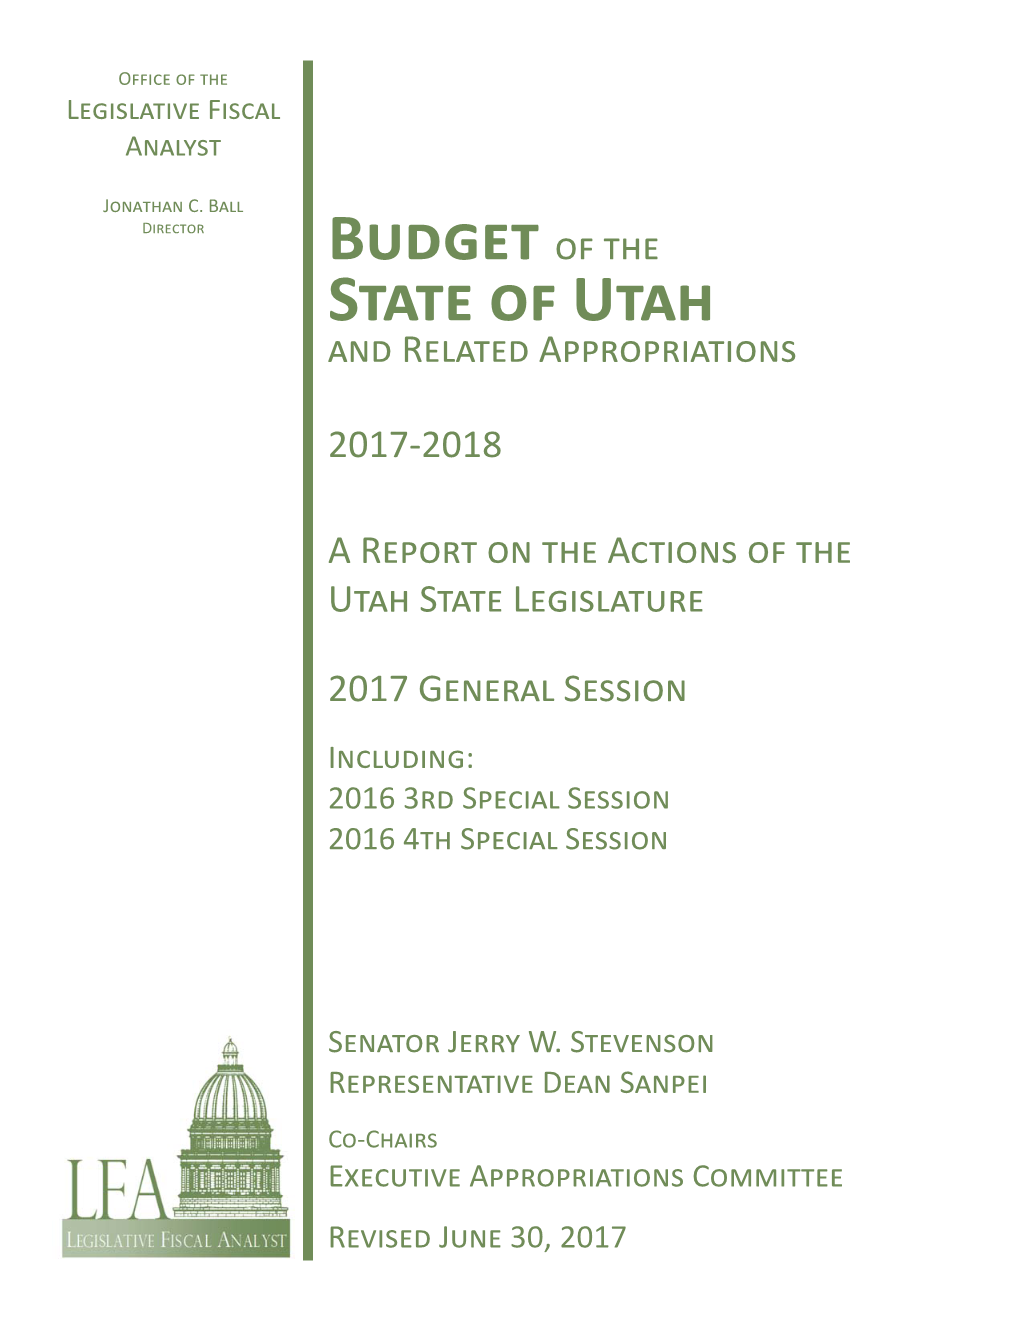 Budget of the State of Utah, 2017-2018